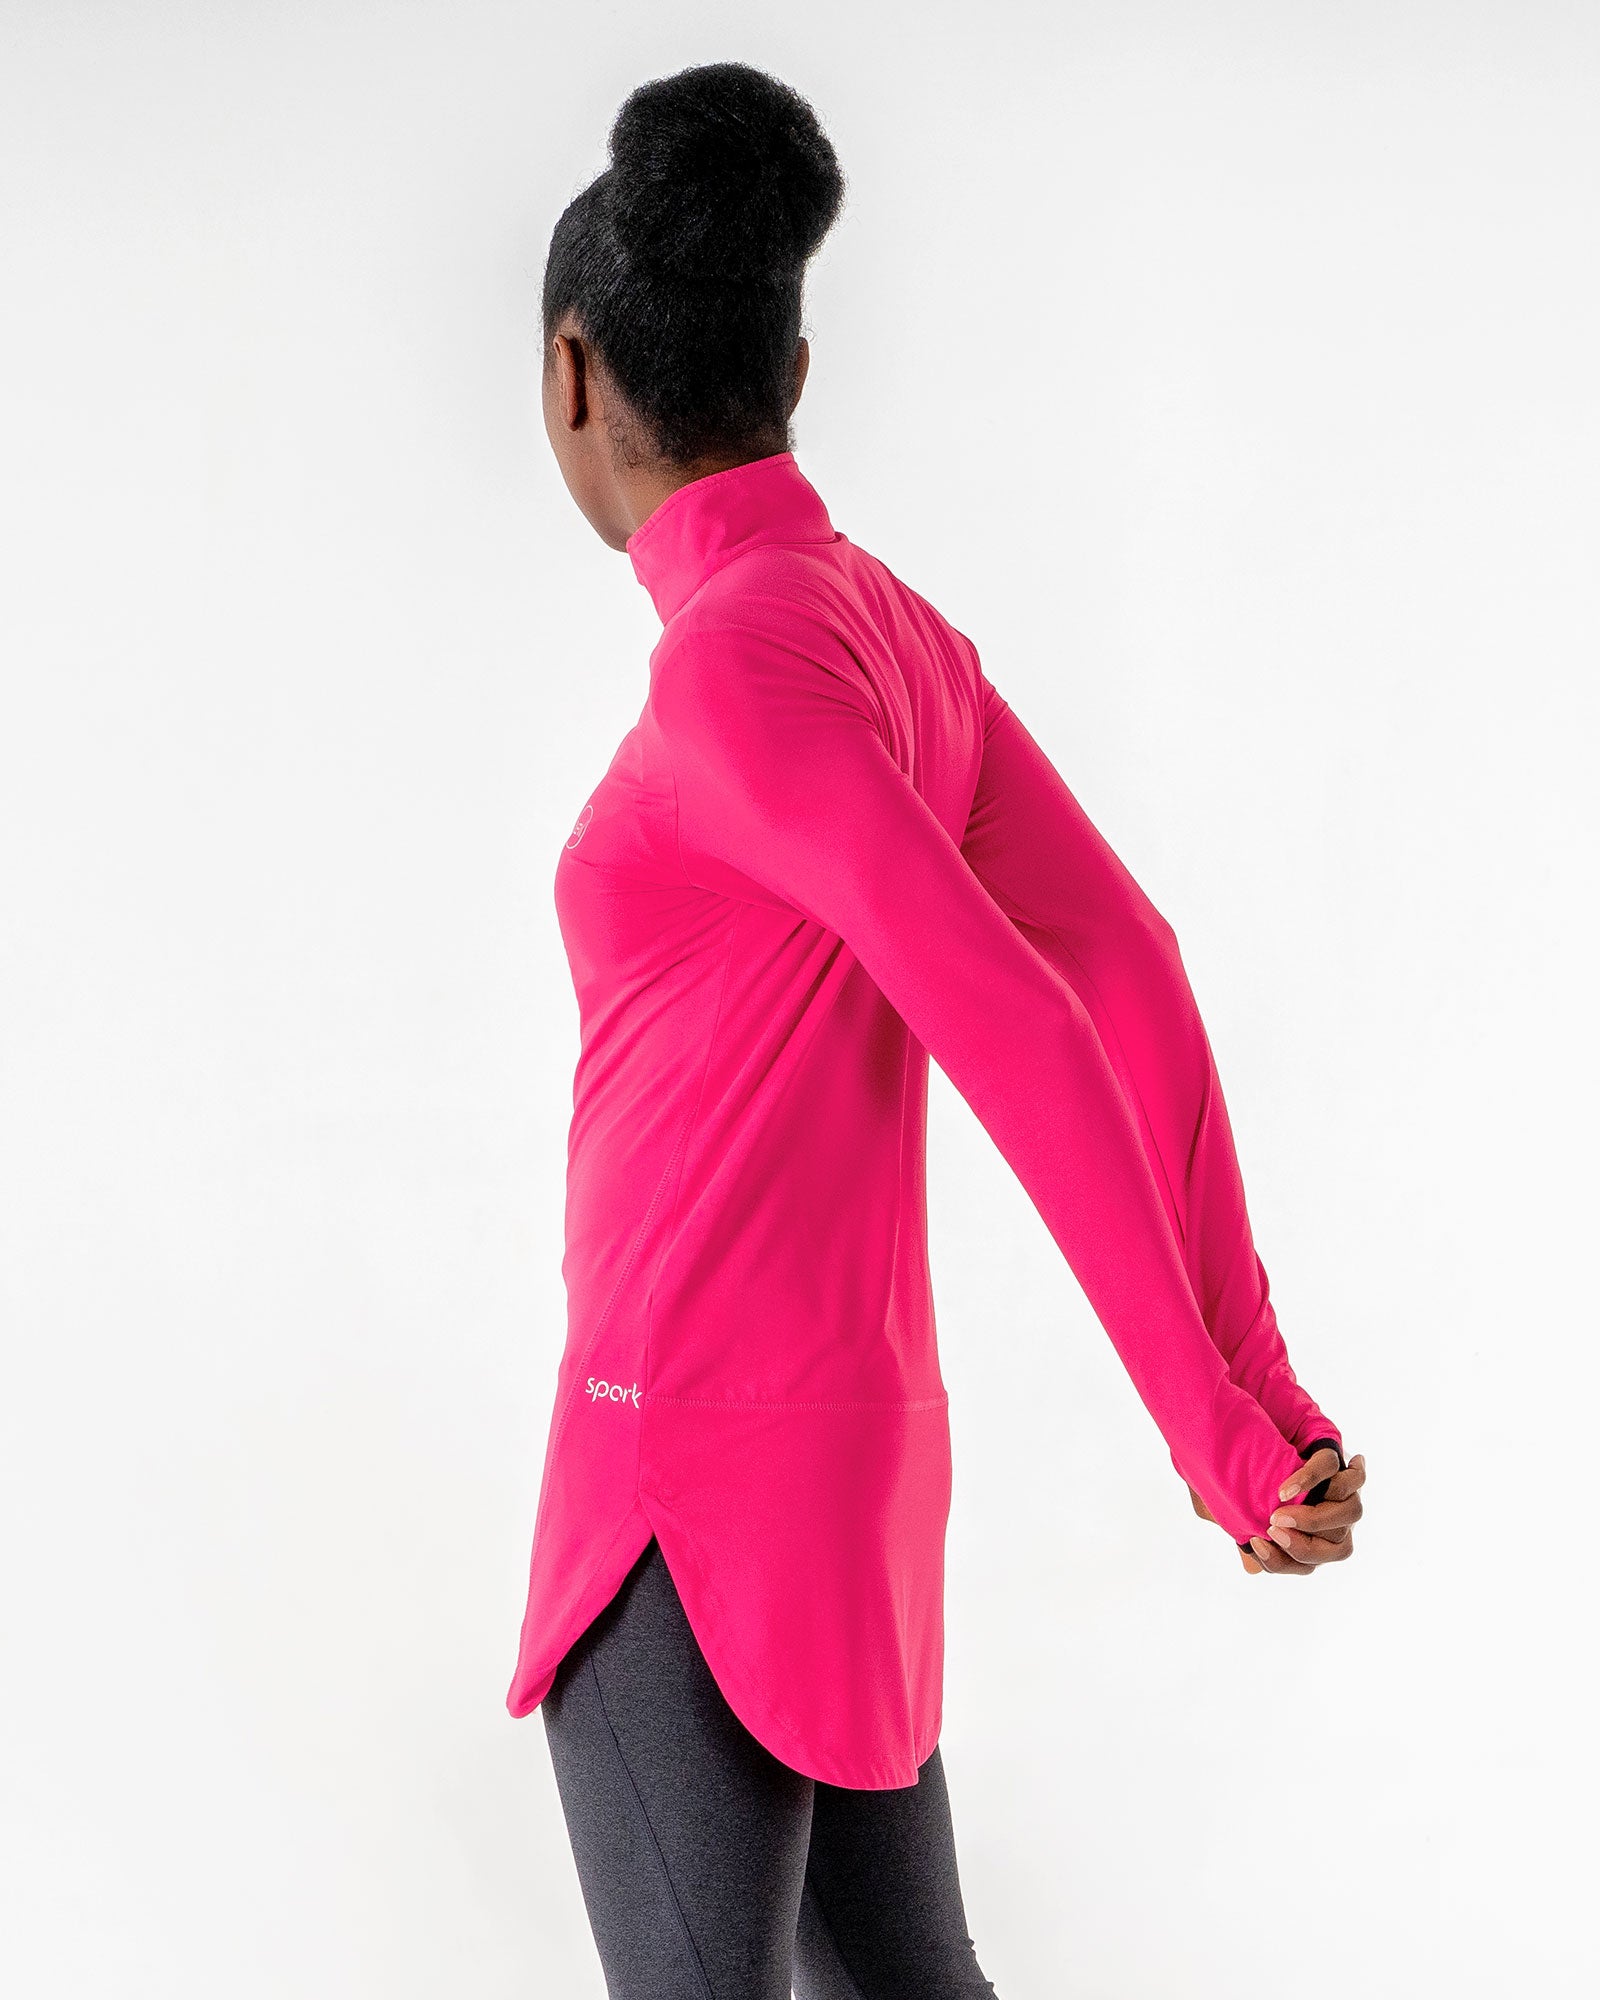 Spark Half-Zip in pink by Veil Garments. Modest activewear collection.